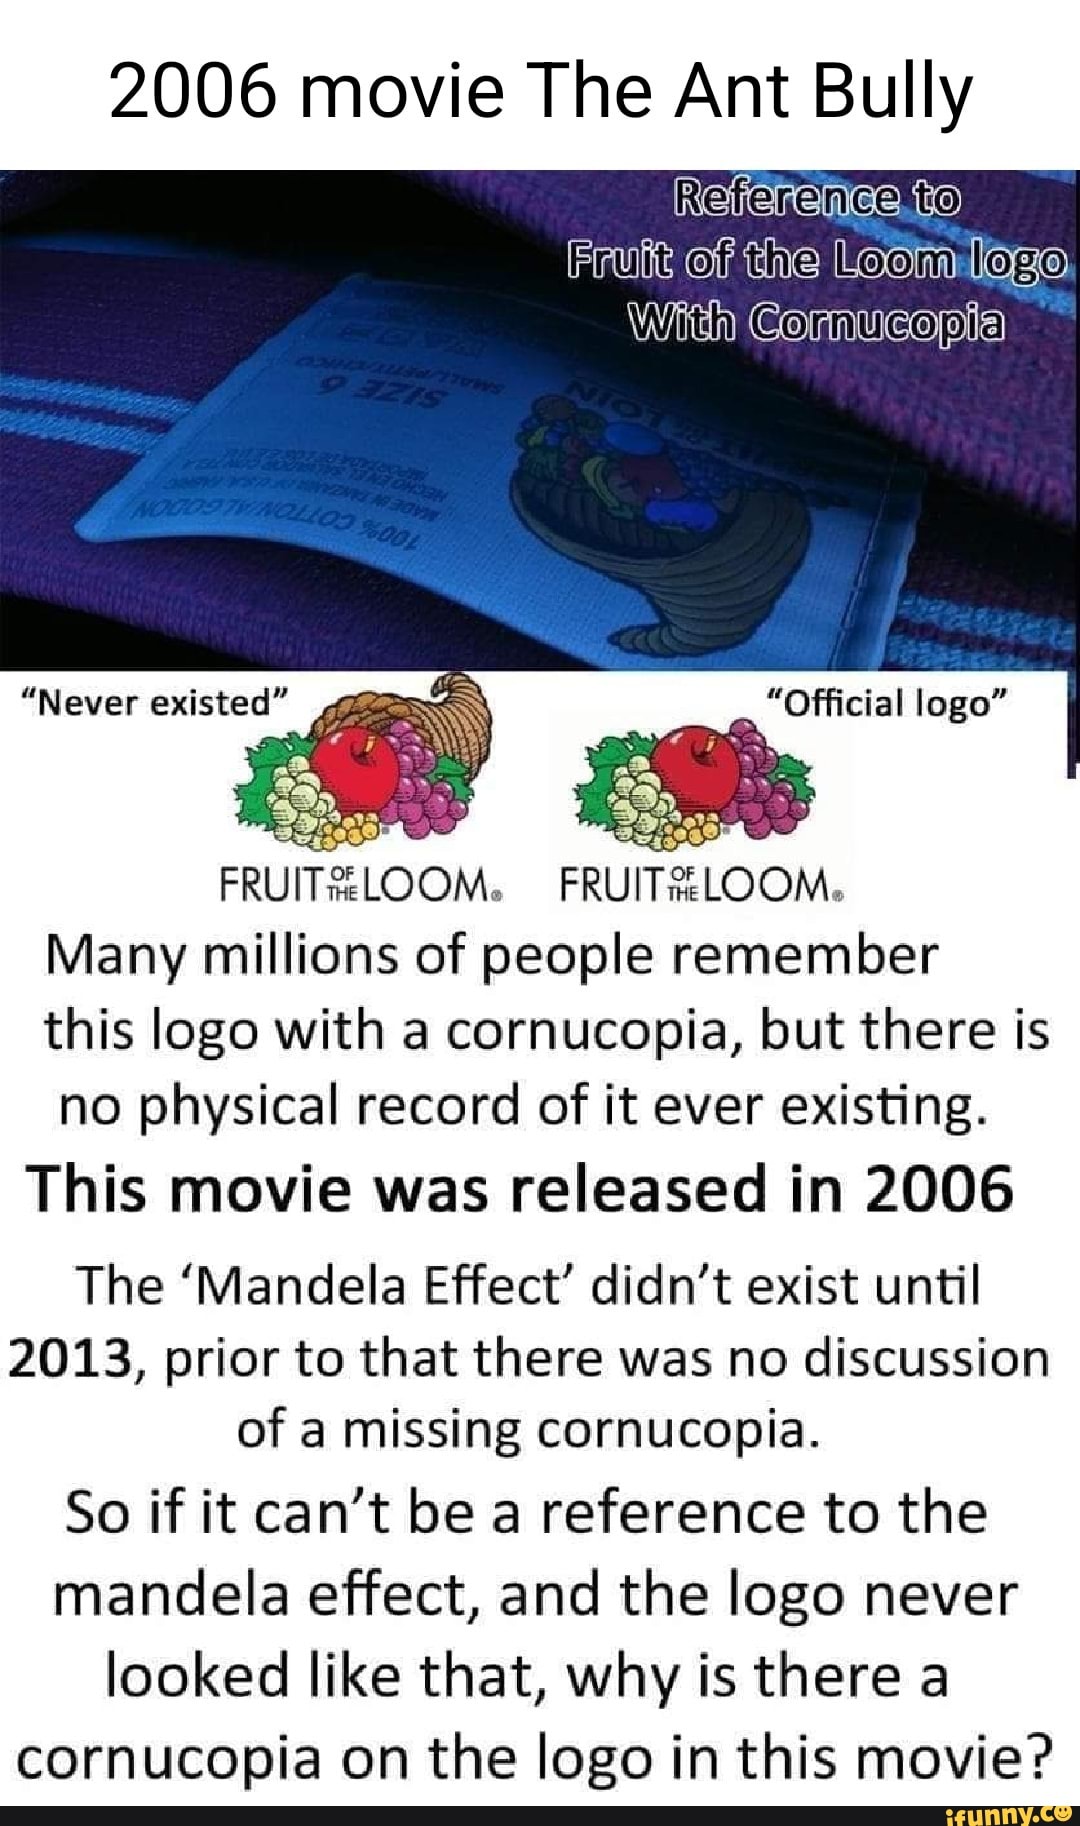 2006 movie The Ant Bully REKATSWCS. LO Fruit of the Loom With Comucopia  Never existed , Official